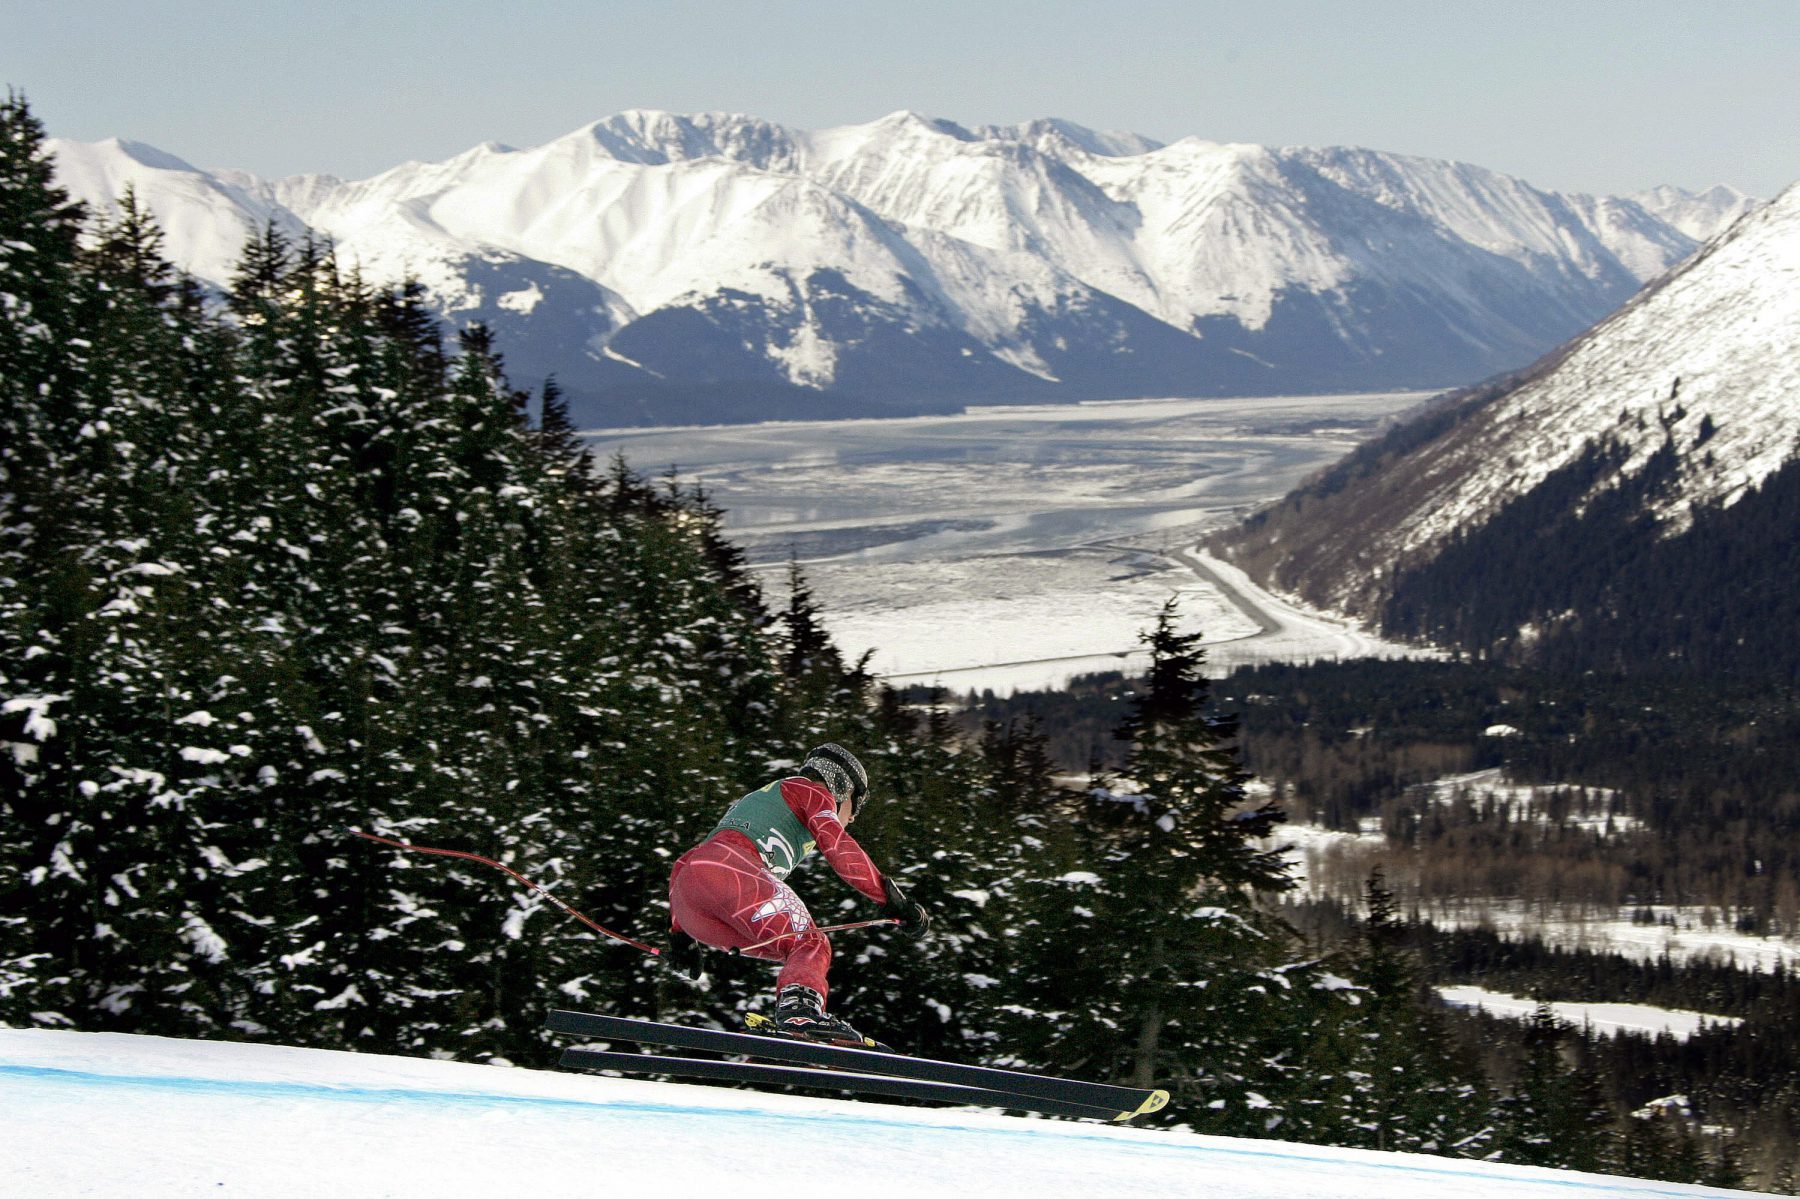 A skier races down the hill at Alyeska Resort in Girdwood, Alaska during the U.S. Alpine Championships, Thursday, March 29, 2007. Turnagain Arm, and Kenai Mountains are seen in the background. (AP Photo/Al Grillo)